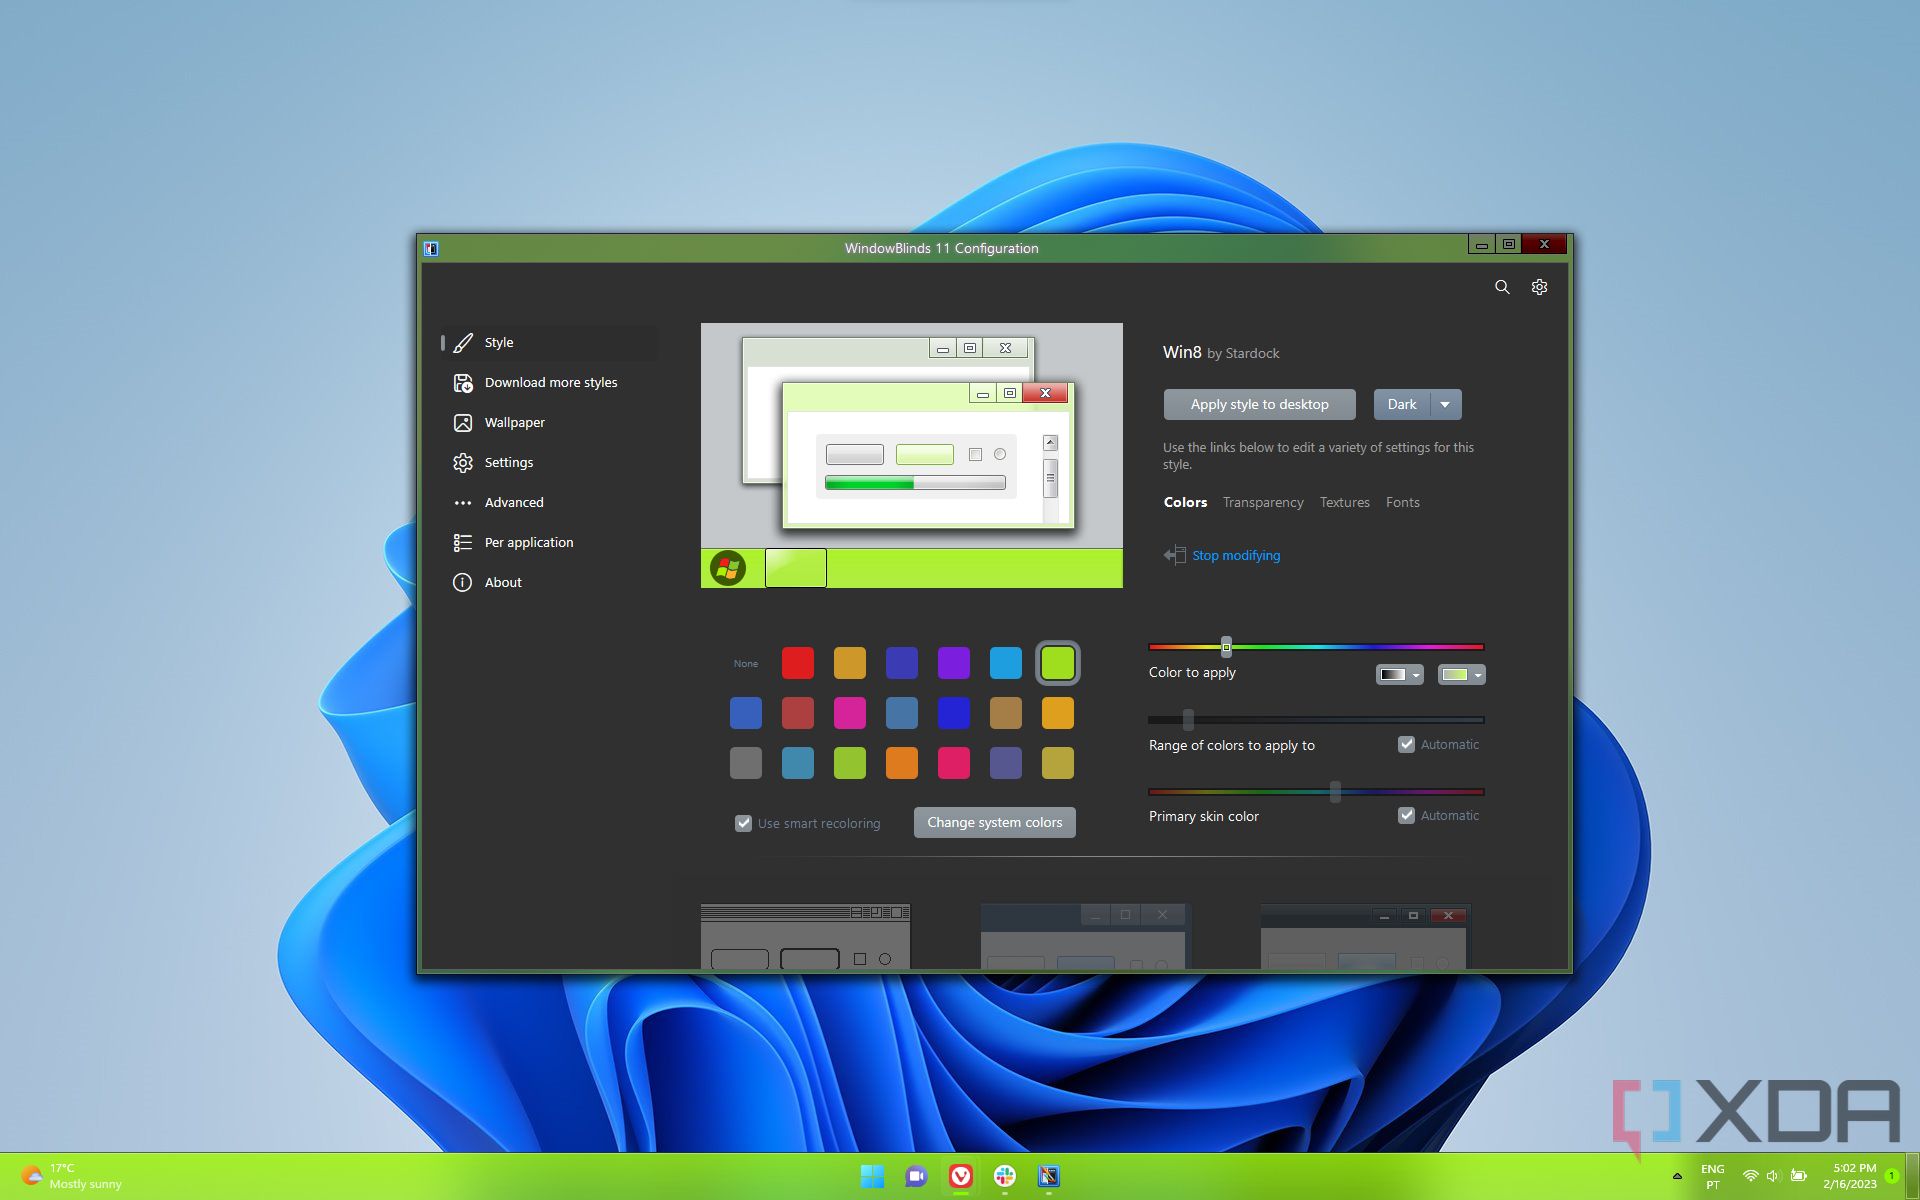 Screenshot of WindowBlinds when customizing the Windows 8 theme applied to the system.